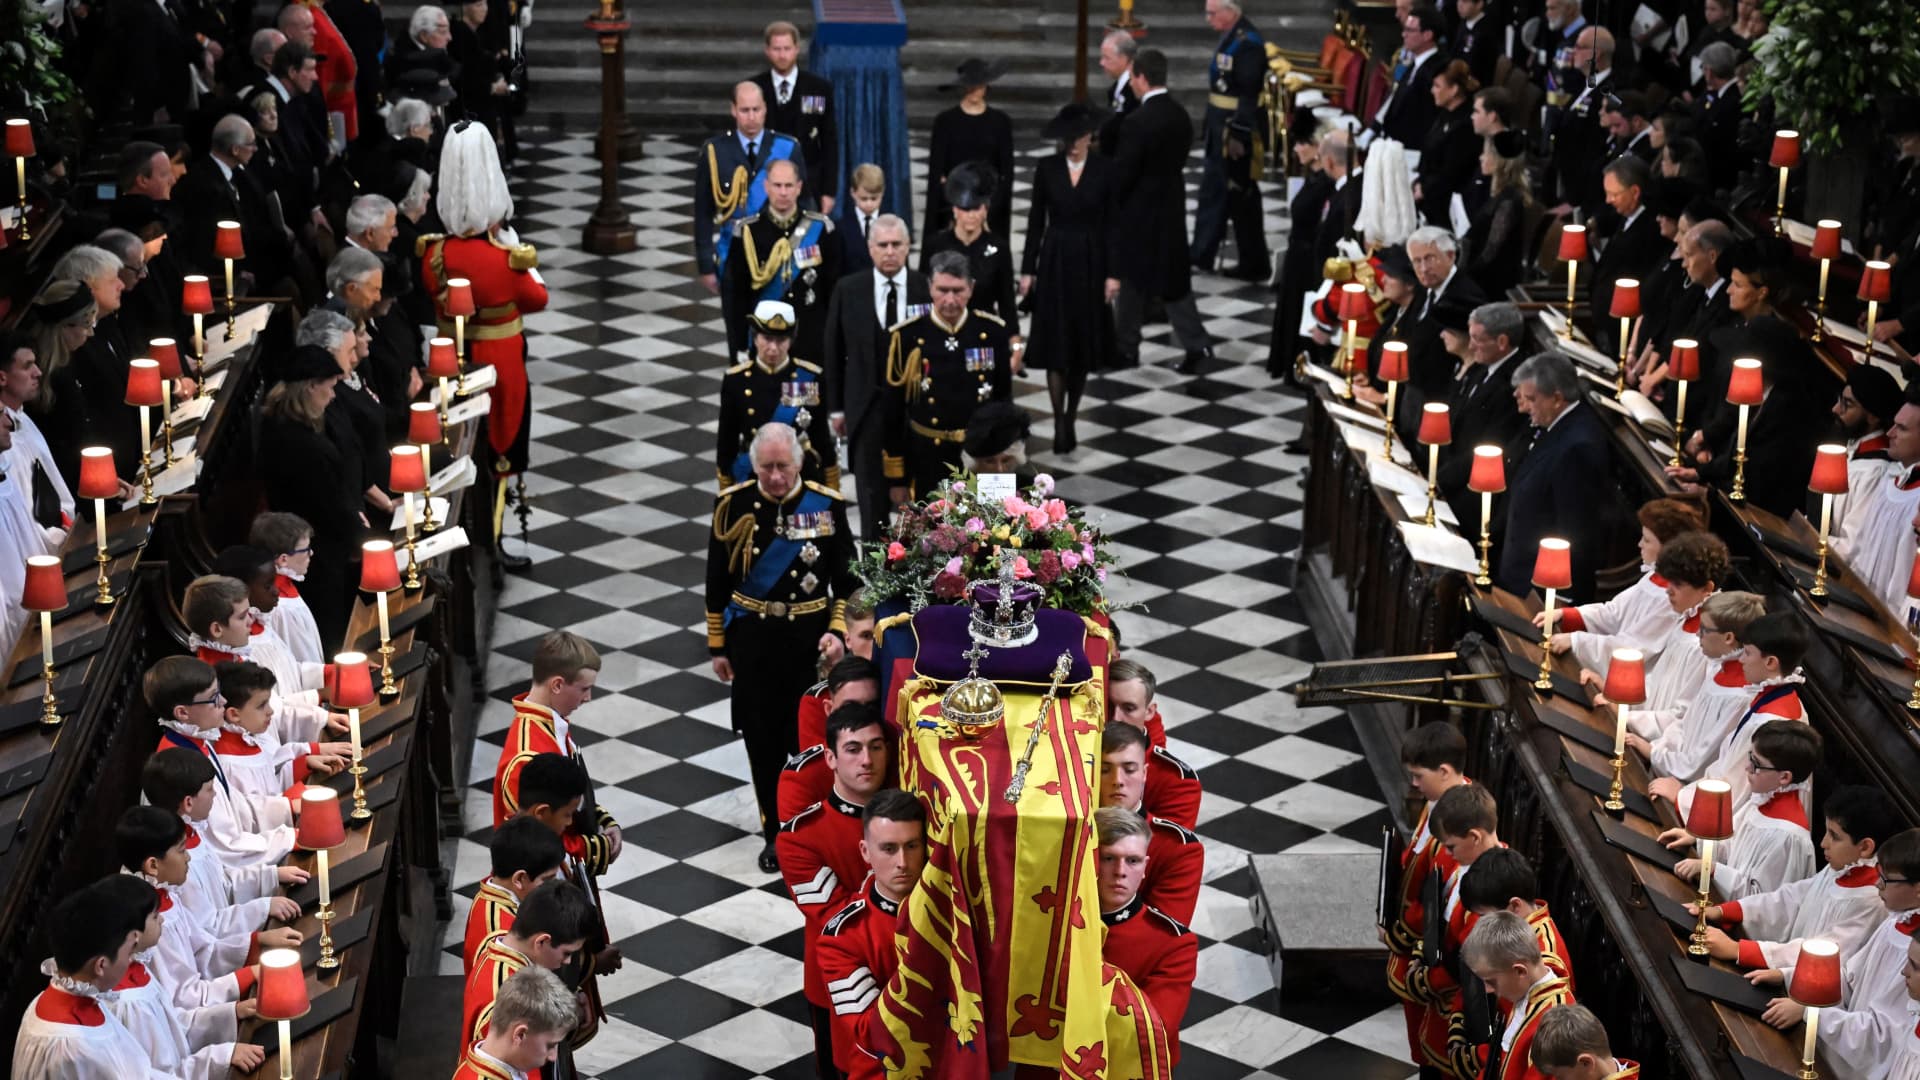 Britain's King Charles III (L), Britain's Camilla, Queen Consort, Britain's Princess Anne, Princess Royal, Vice Admiral Timothy Laurence, Britain's Prince Andrew, Duke of York, Britain's Prince Edward, Earl of Wessex, Britain's Sophie, Countess of Wessex, Britain's Prince William, Prince of Wales, Britain's Prince George of Wales, Britain's Catherine, Princess of Wales, Britain's Prince Harry, Duke of Sussex and Meghan, Duchess of Sussex walk behind the coffin of Britain's Queen Elizabeth II as they leave Westminster Abbey in London on September 19, 2022, after the State Funeral Service for Britain's Queen Elizabeth II.